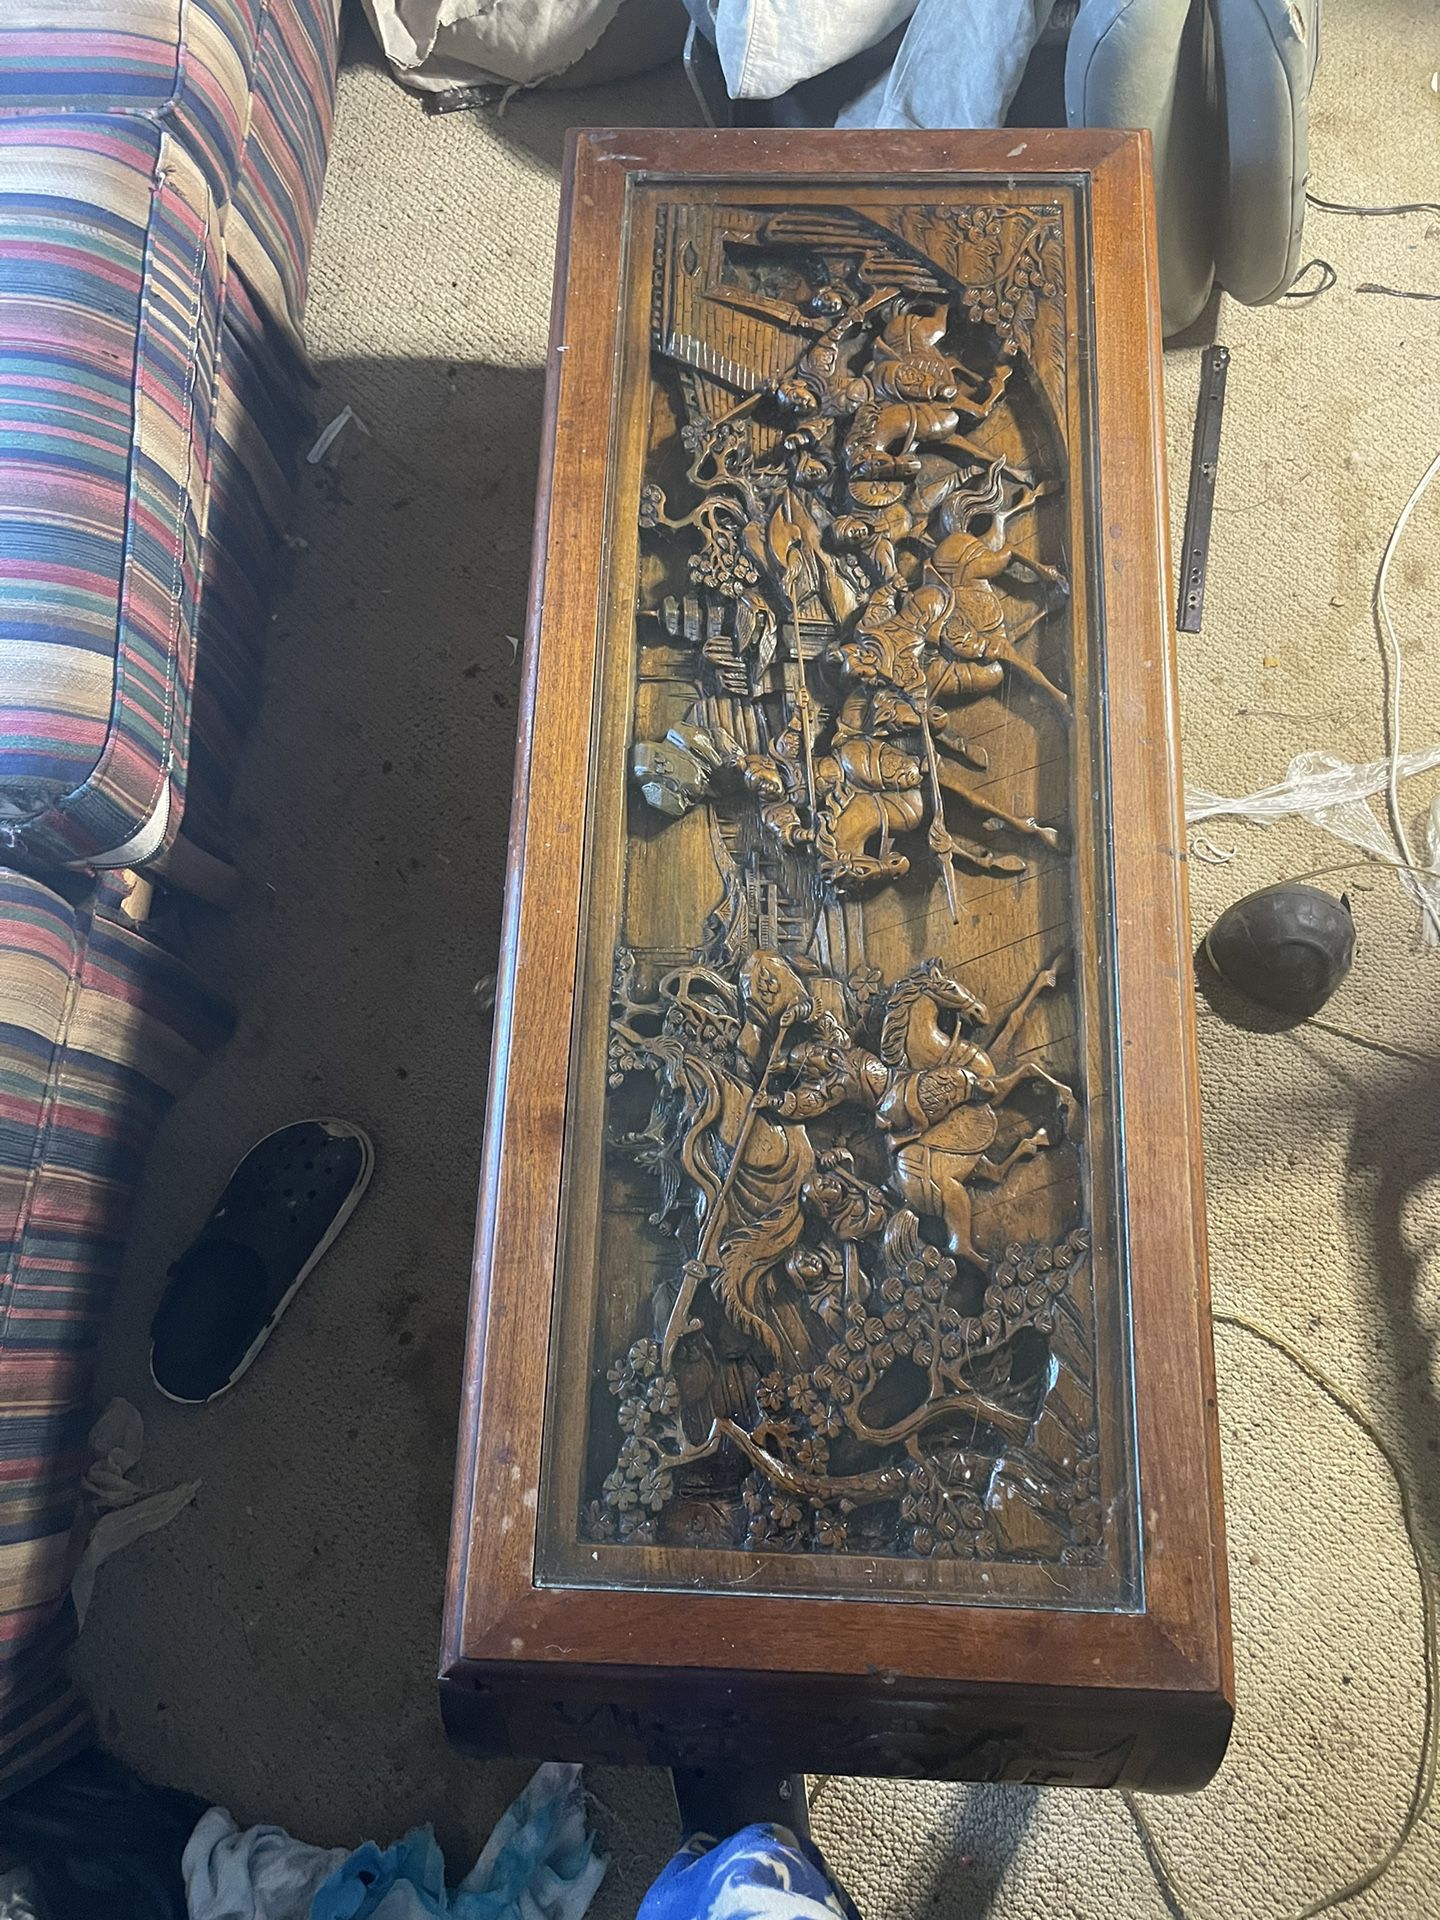 Carbs, coffee table from Japan, antique